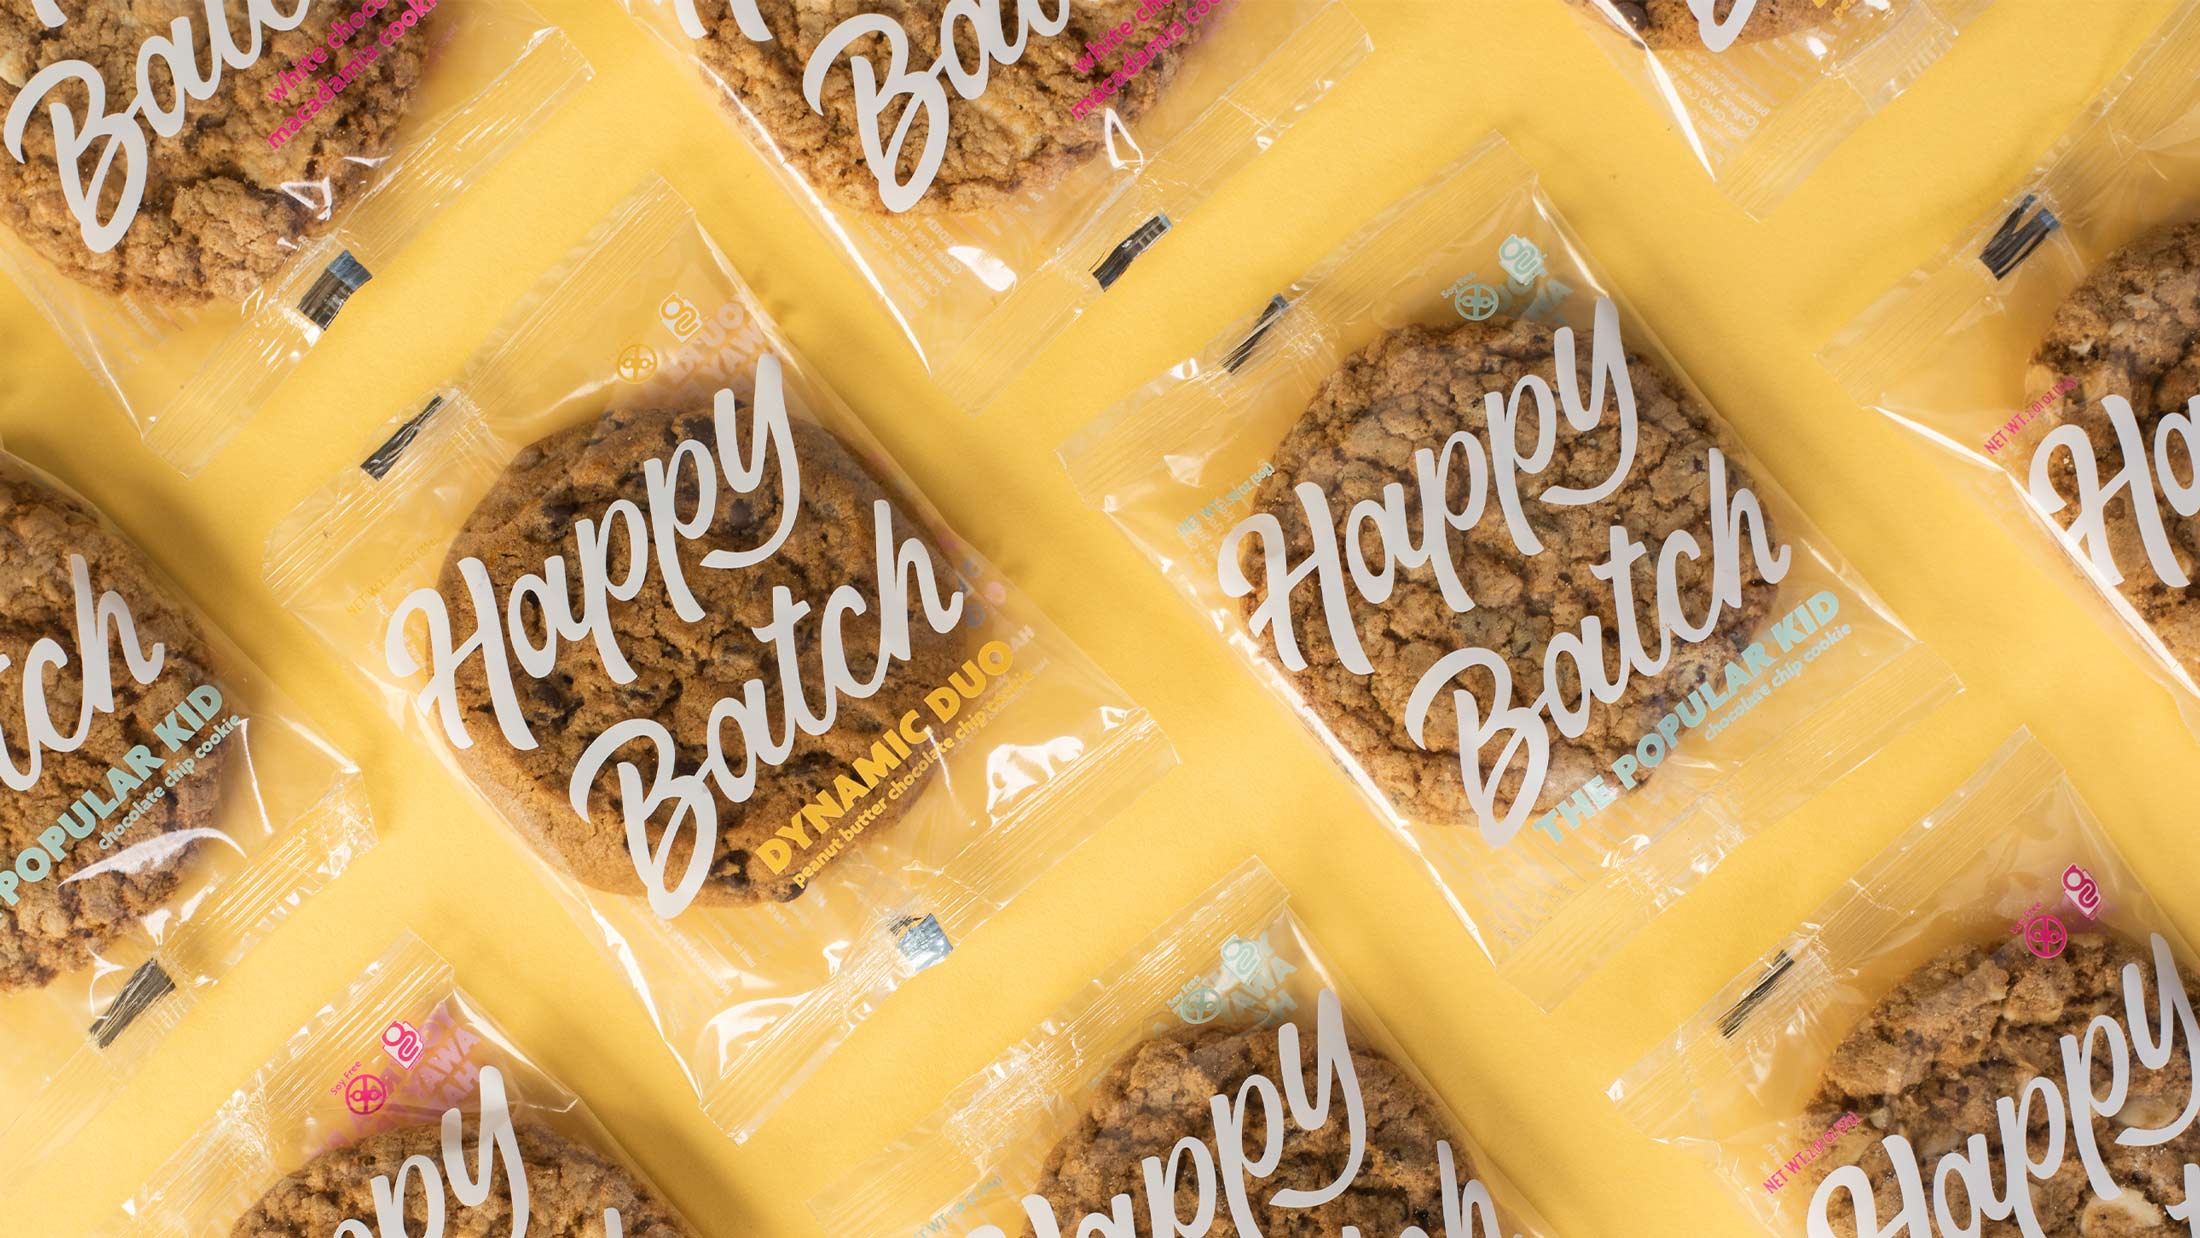 Happy Batch cookie packaging designs against a yellow background